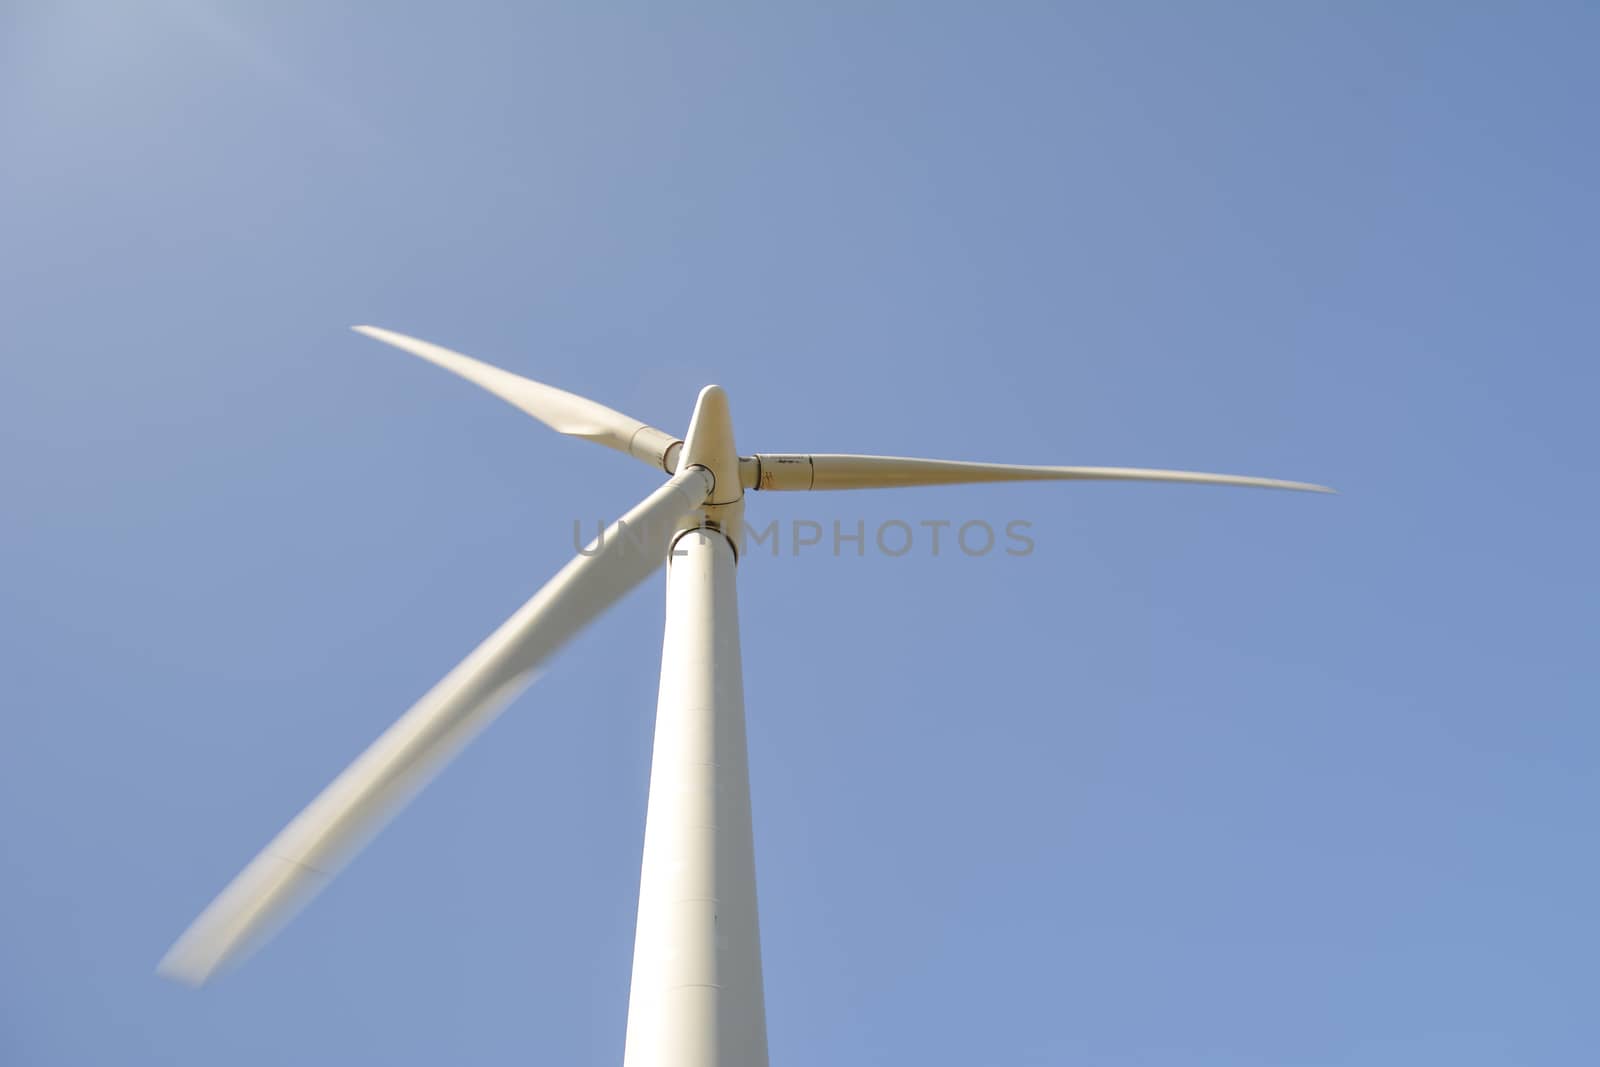 Close-up and low angle view of spinning blades of a wind turbine generating renewable energy by kb79